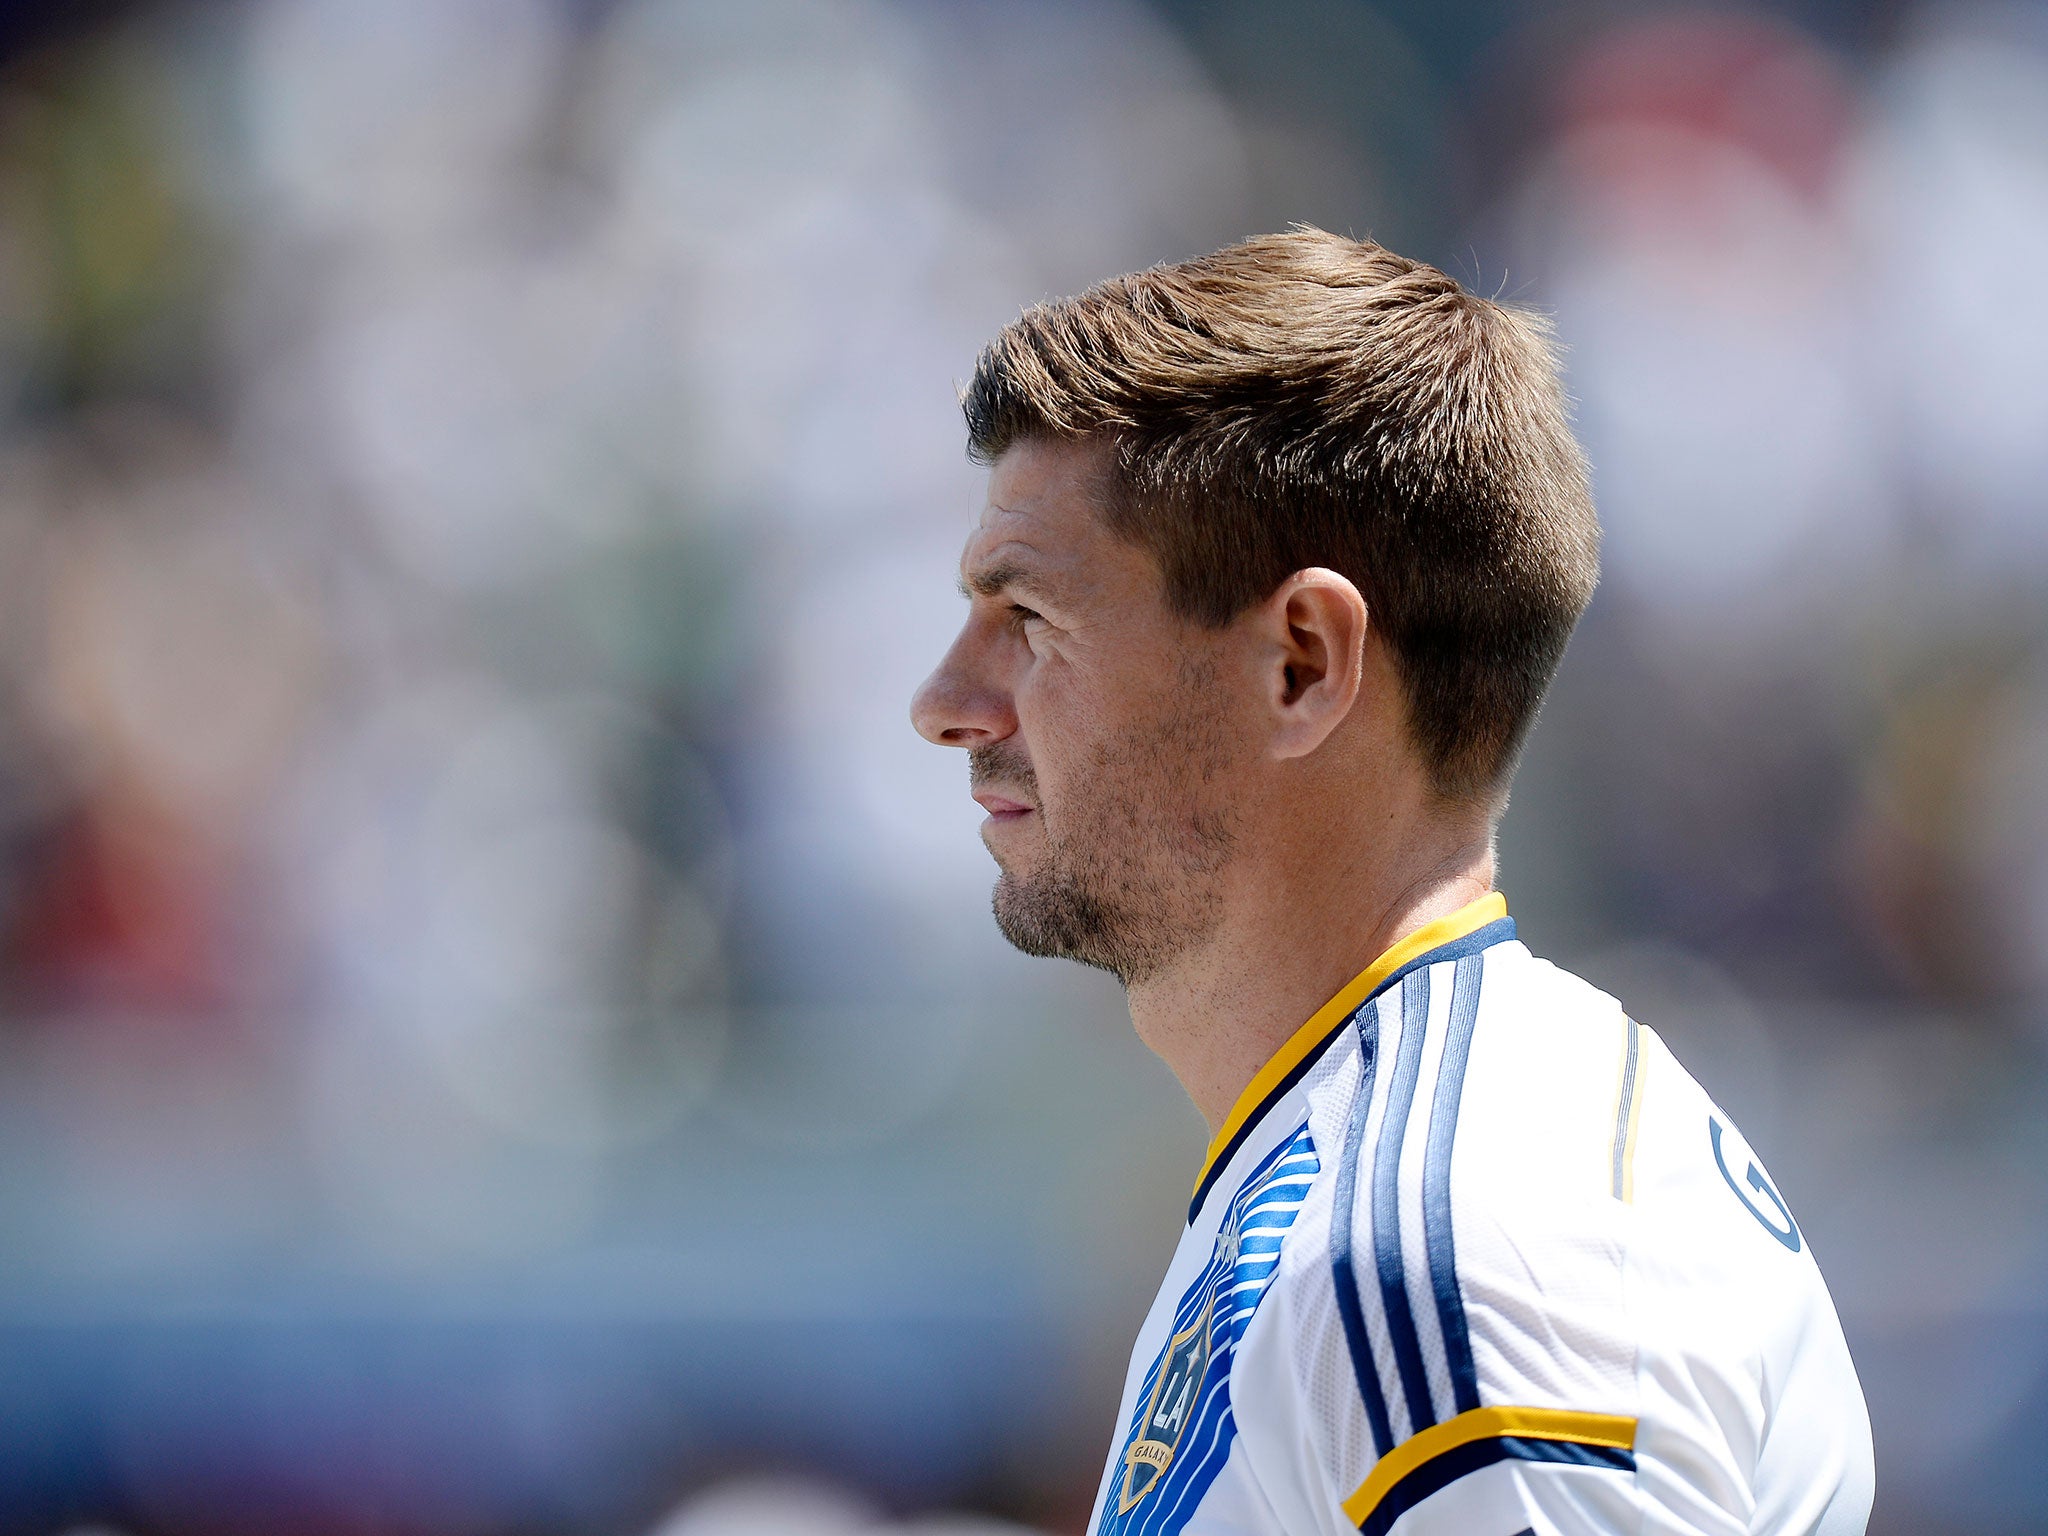 Steven Gerrard's professional career could be drawing to a close